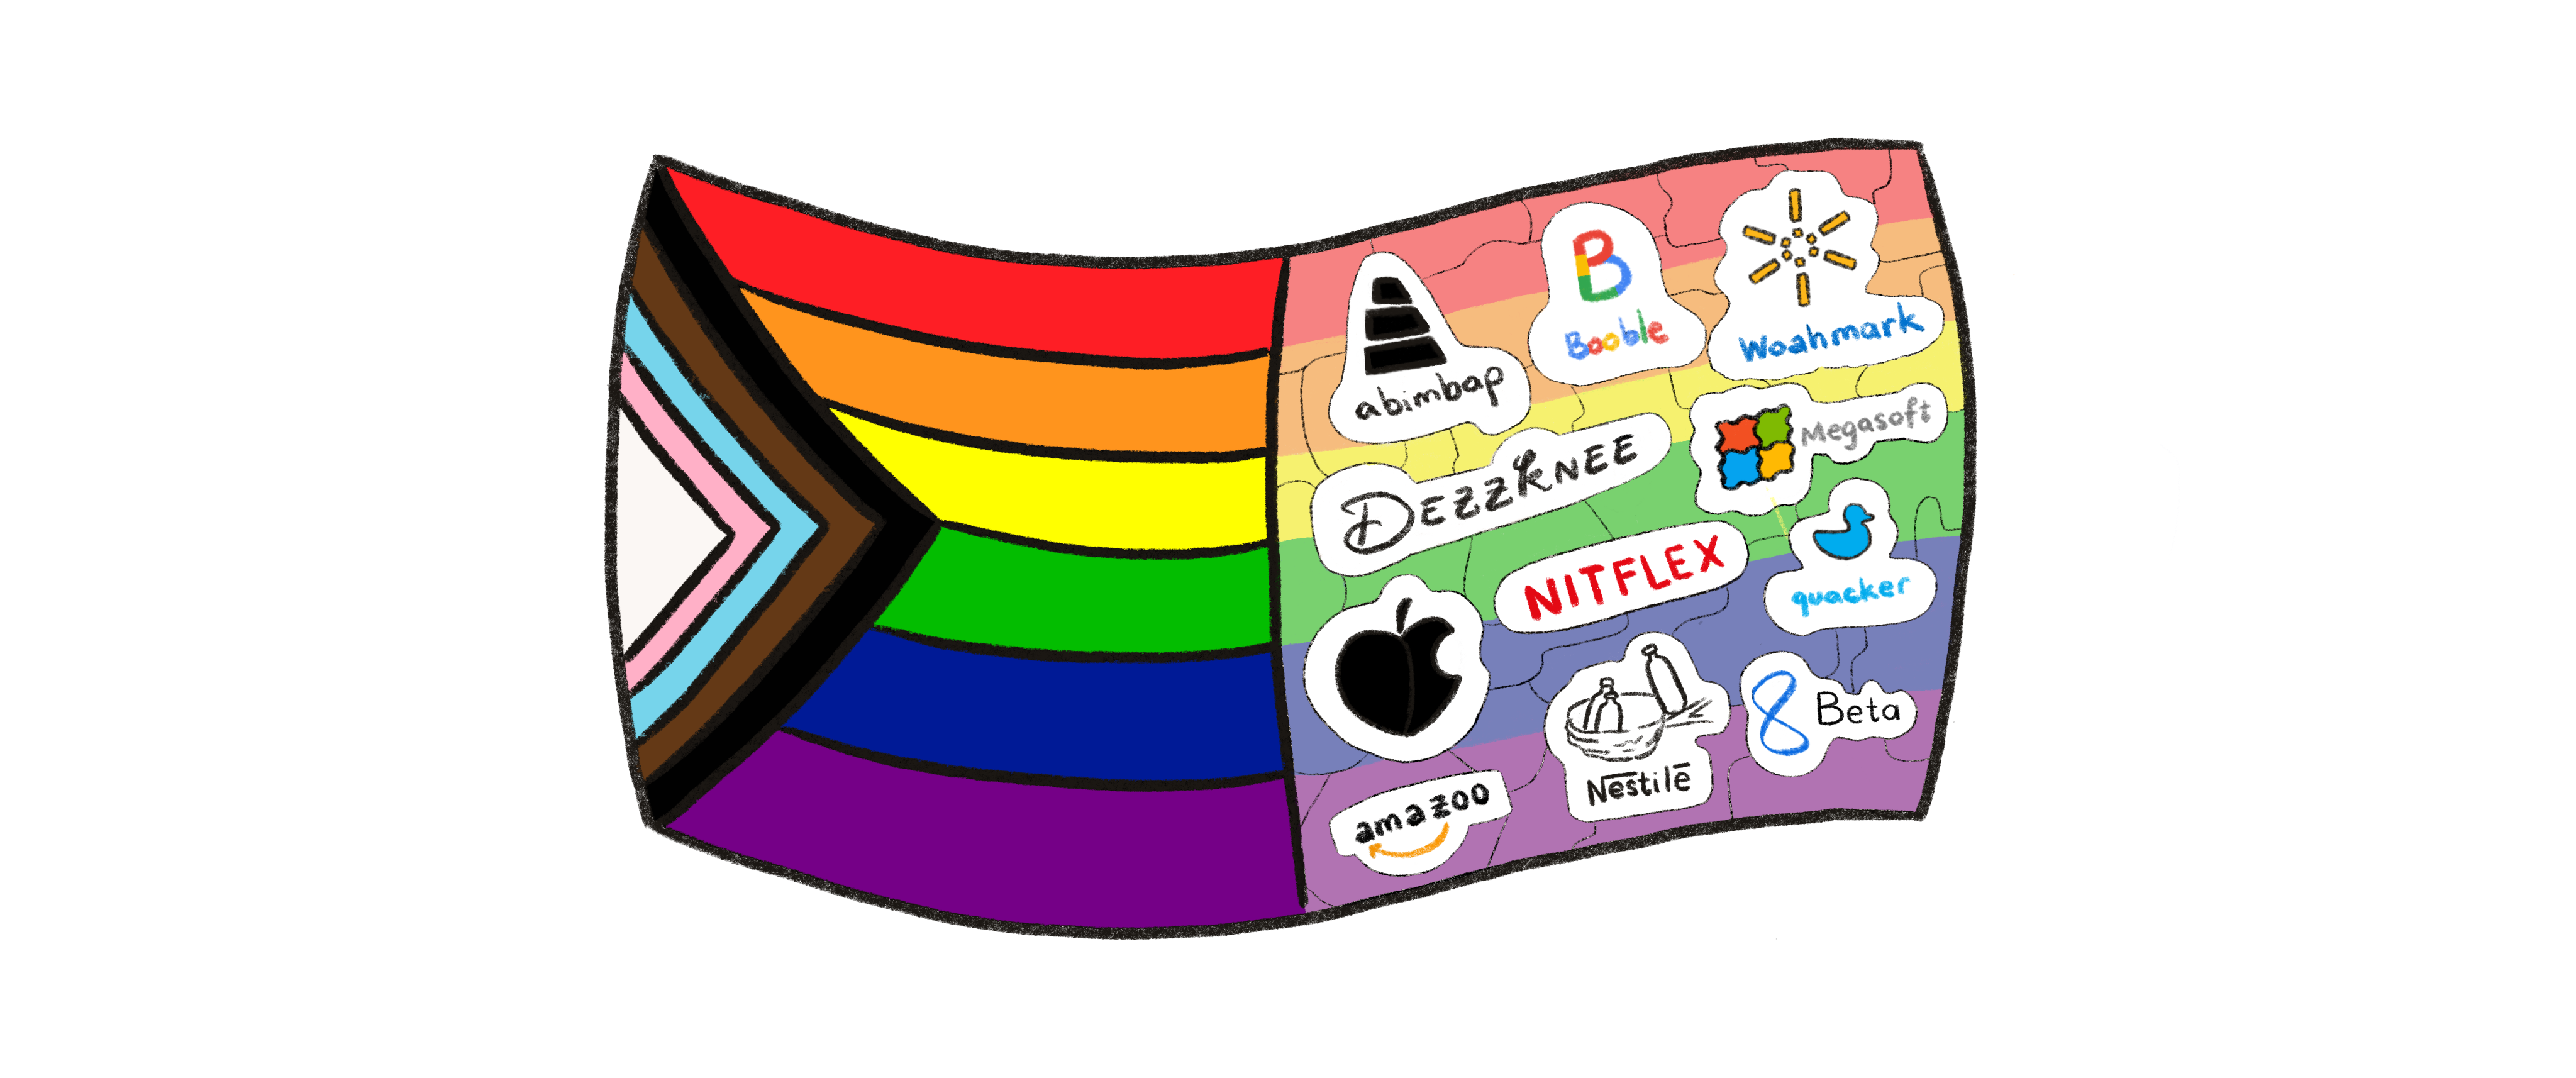 Pride flag crossed with corporate logos